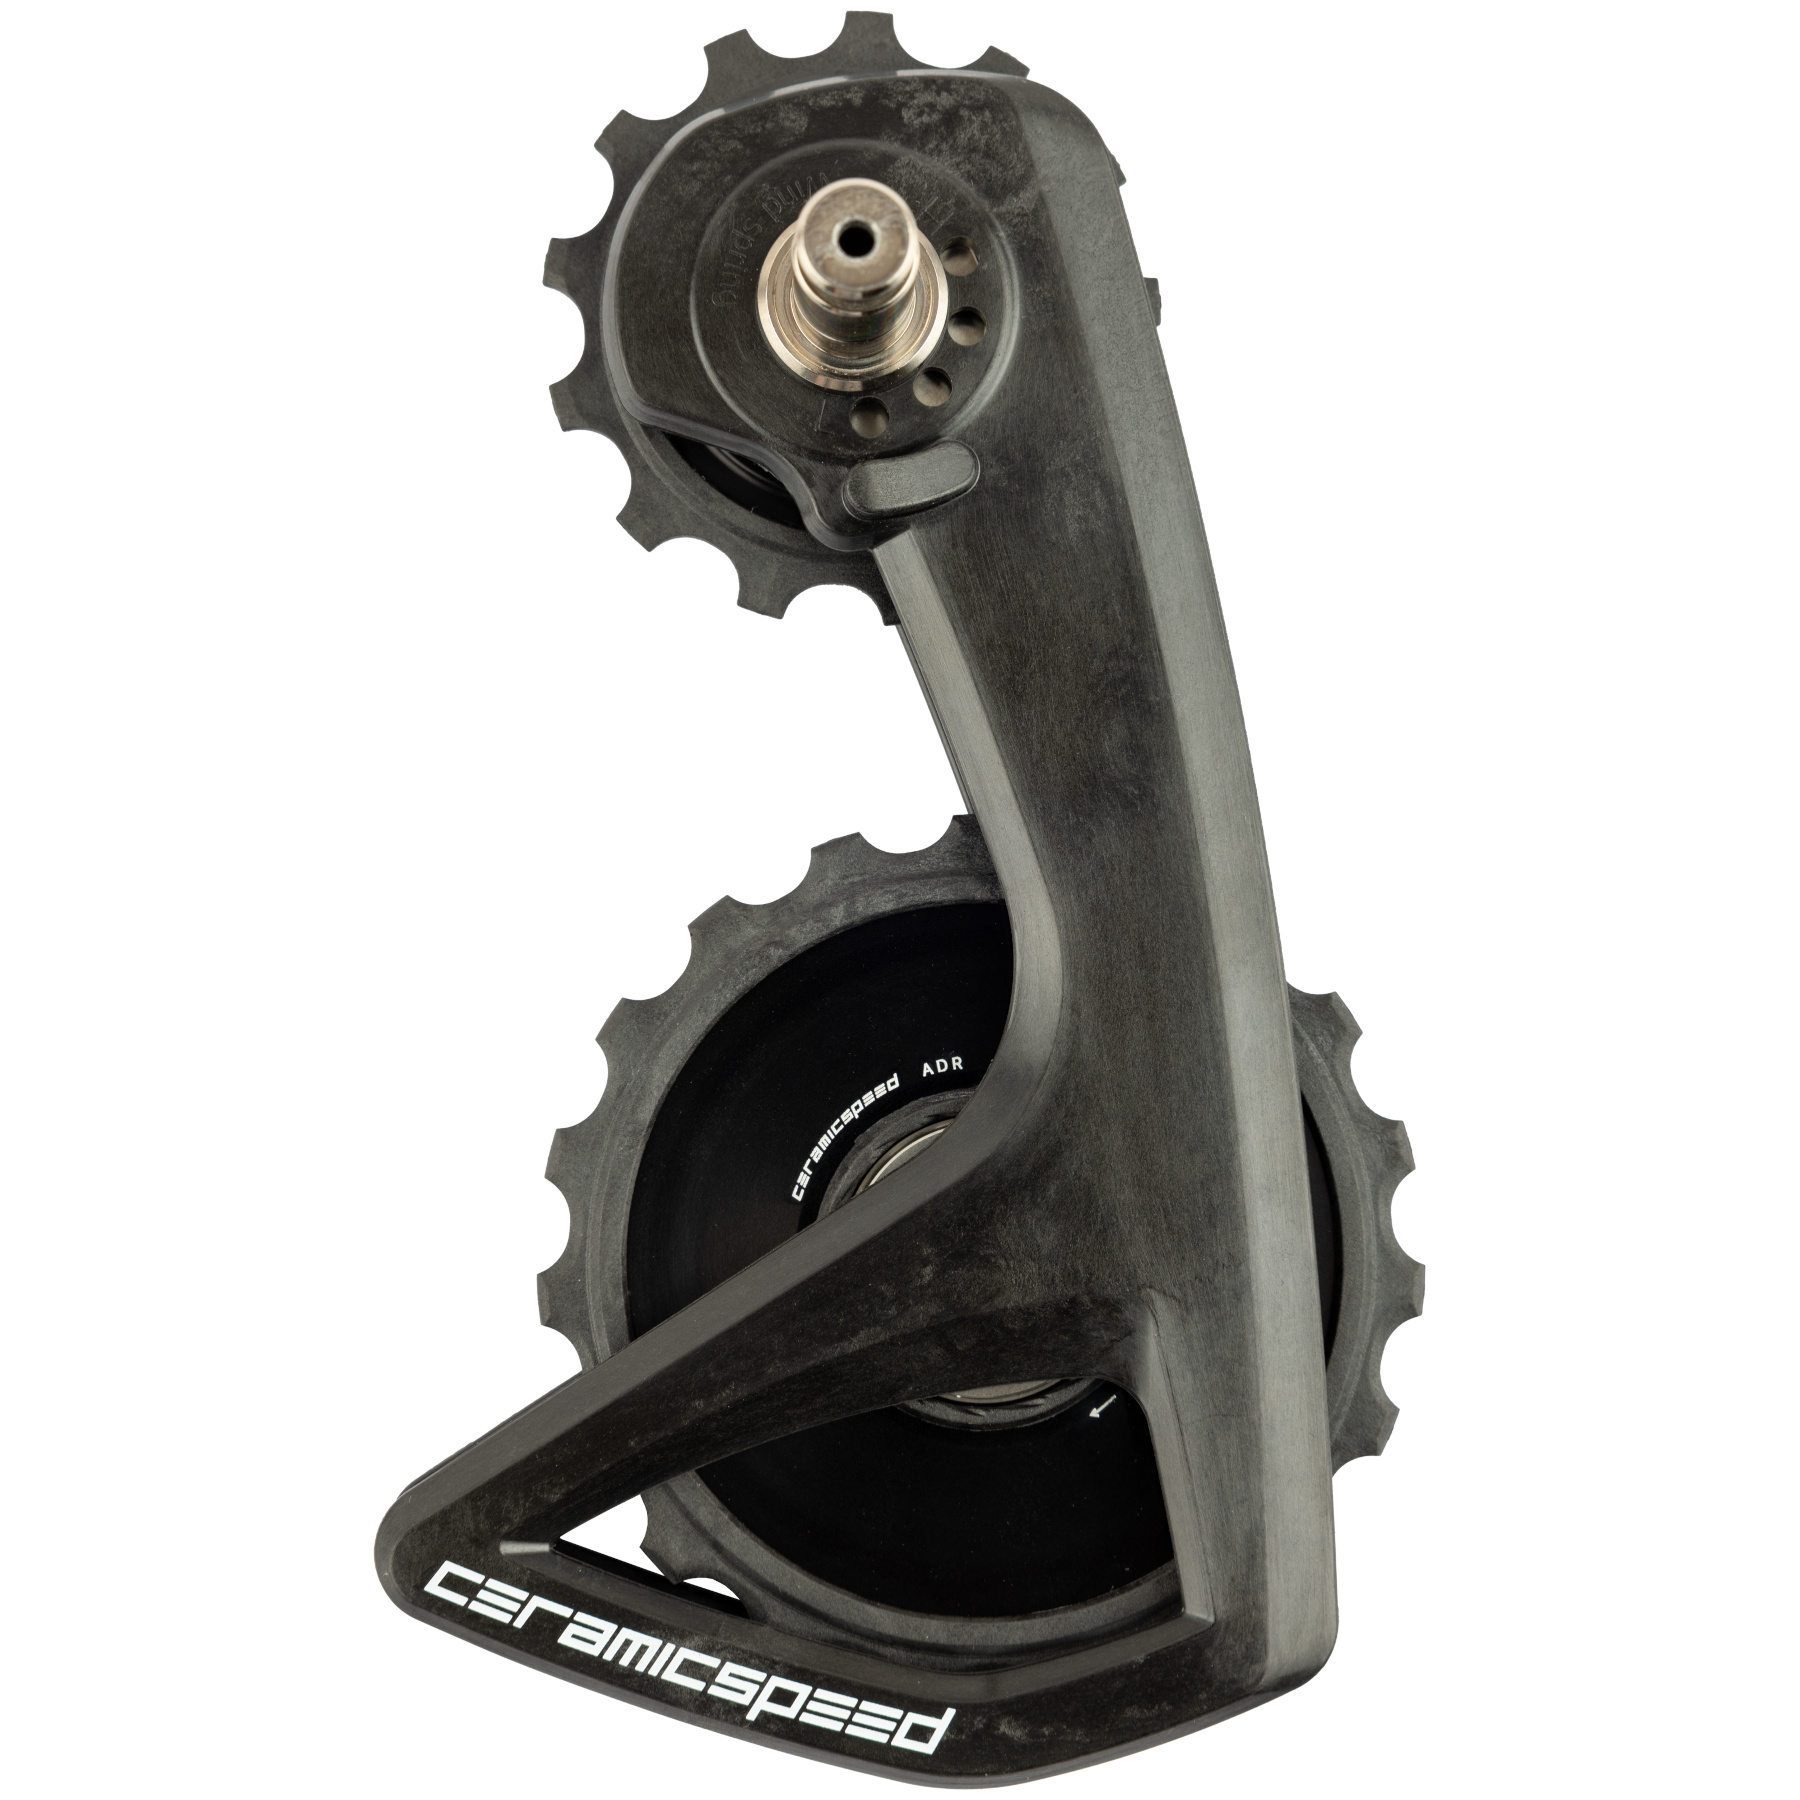 CeramicSpeed OSPW RS Derailleur Pulley System - Alpha Disc | for Shimano  Dura Ace/Ultegra Di2 (R9250/R8150) - black